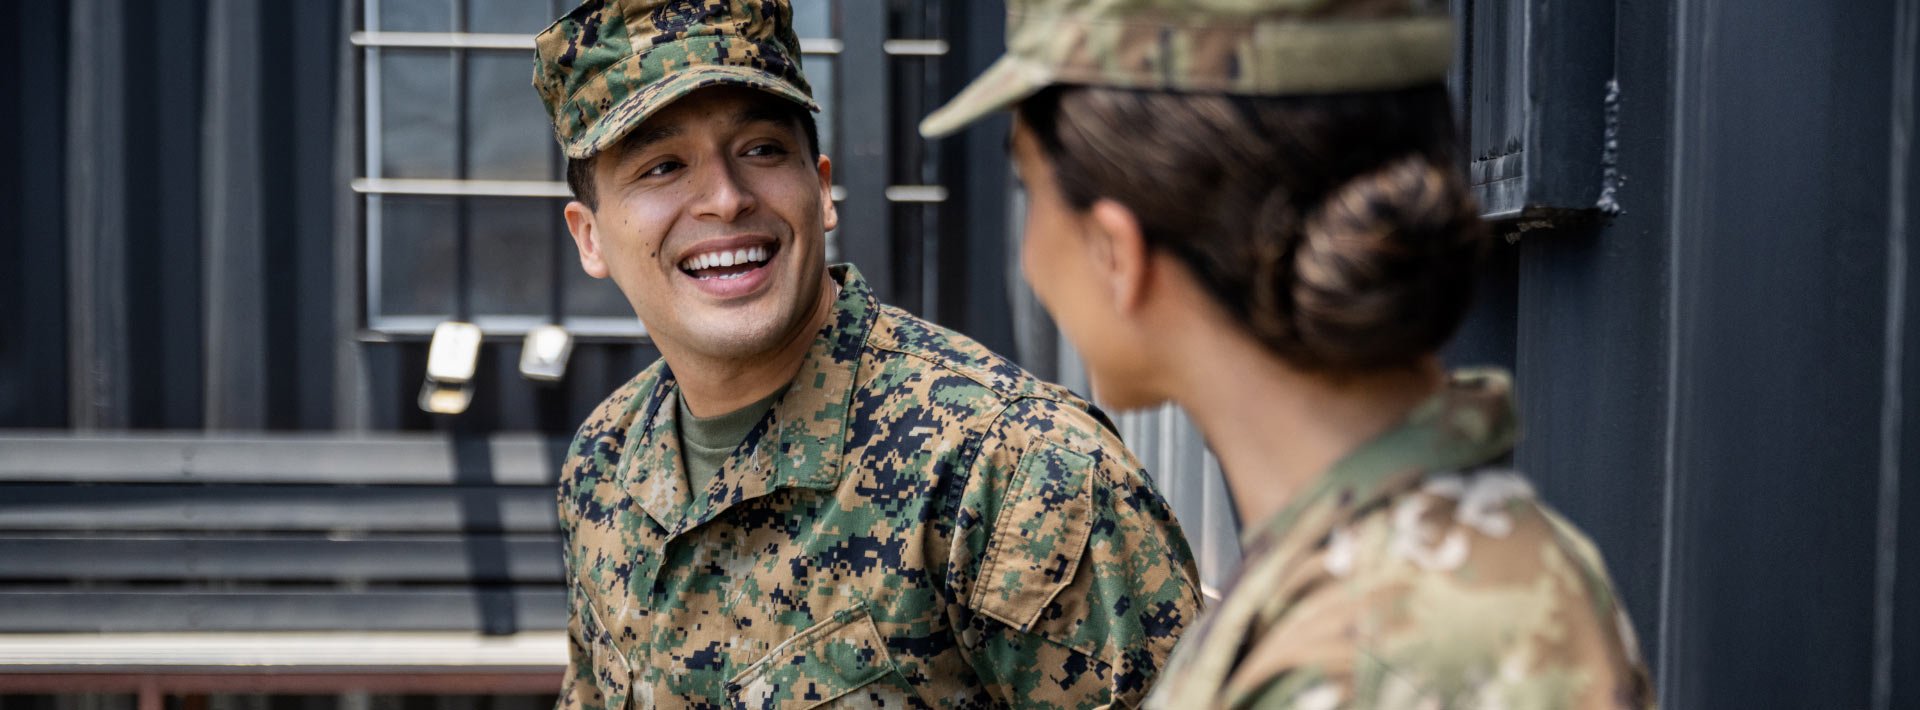 A man and a woman, both in camo uniforms, talk in front of a building